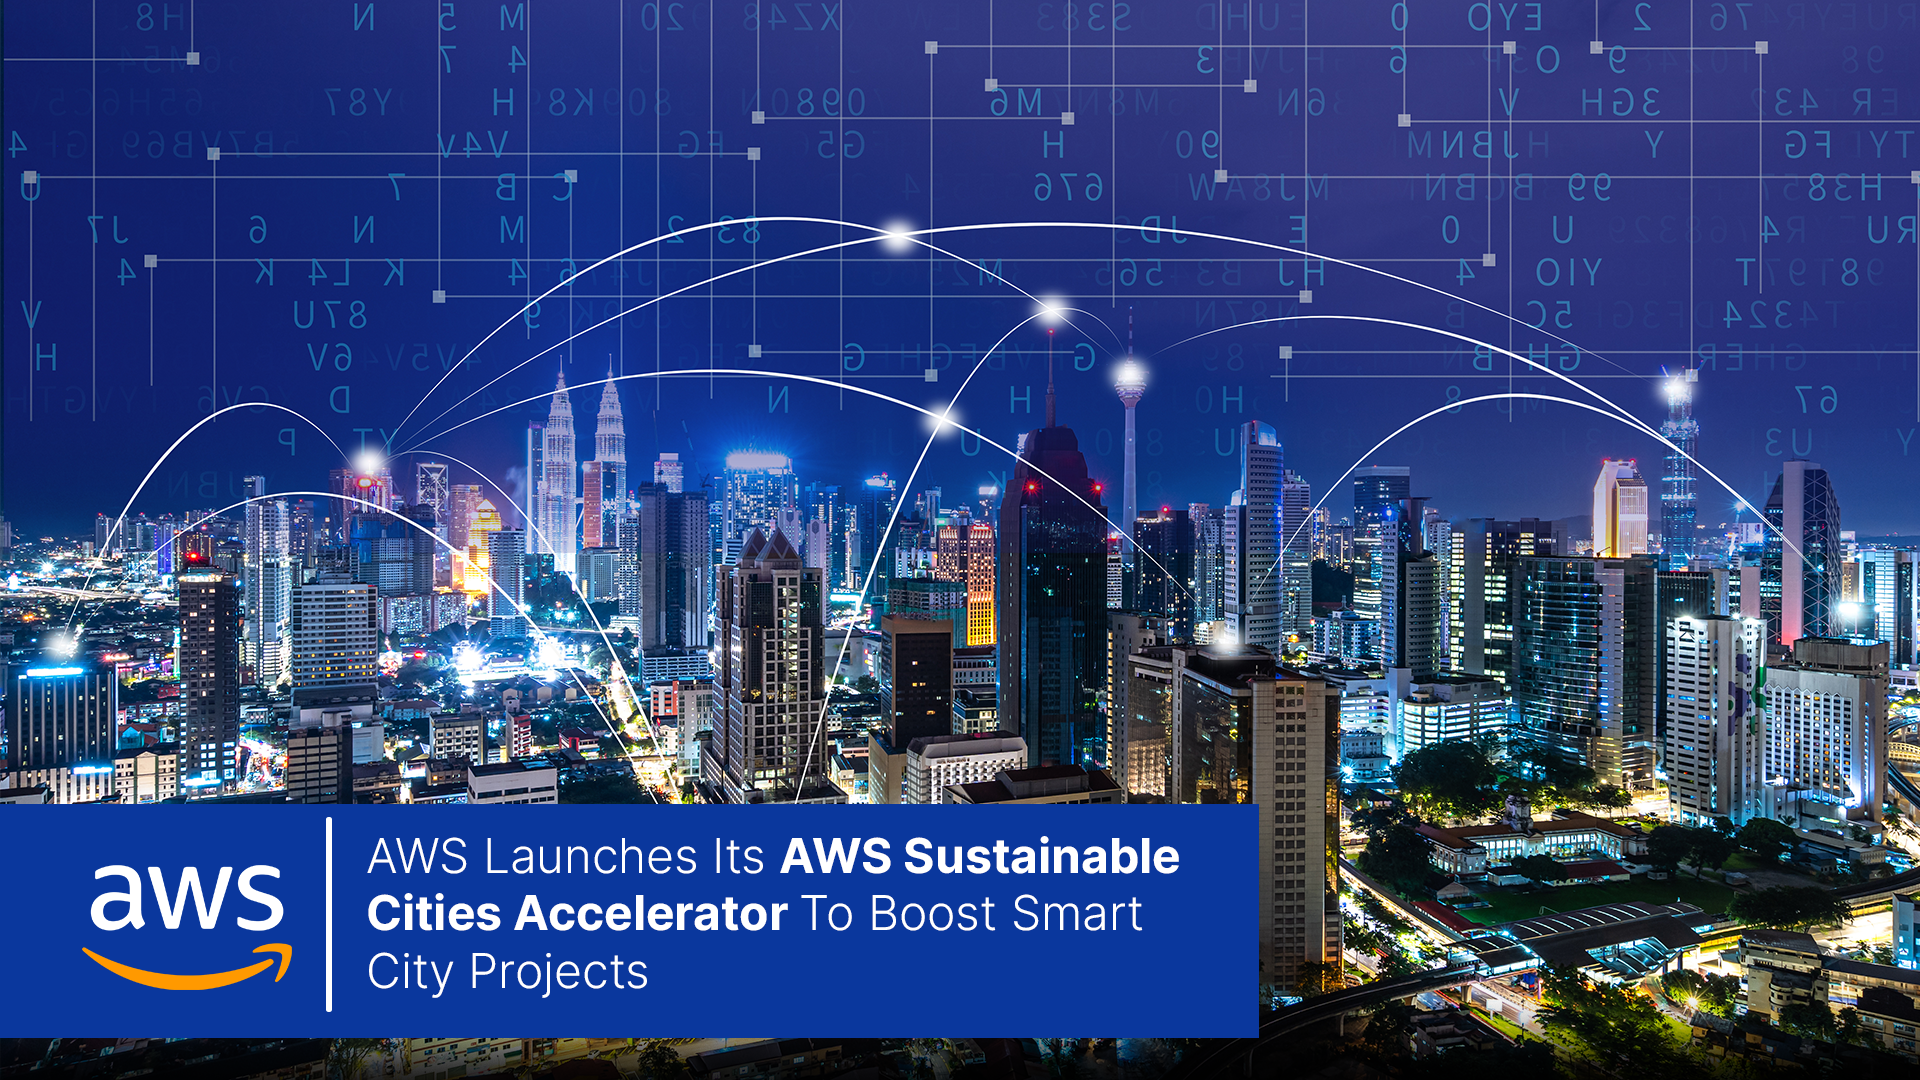 AWS Launches Its "AWS Sustainable Cities Accelerator" To Boost Smart City Projects.